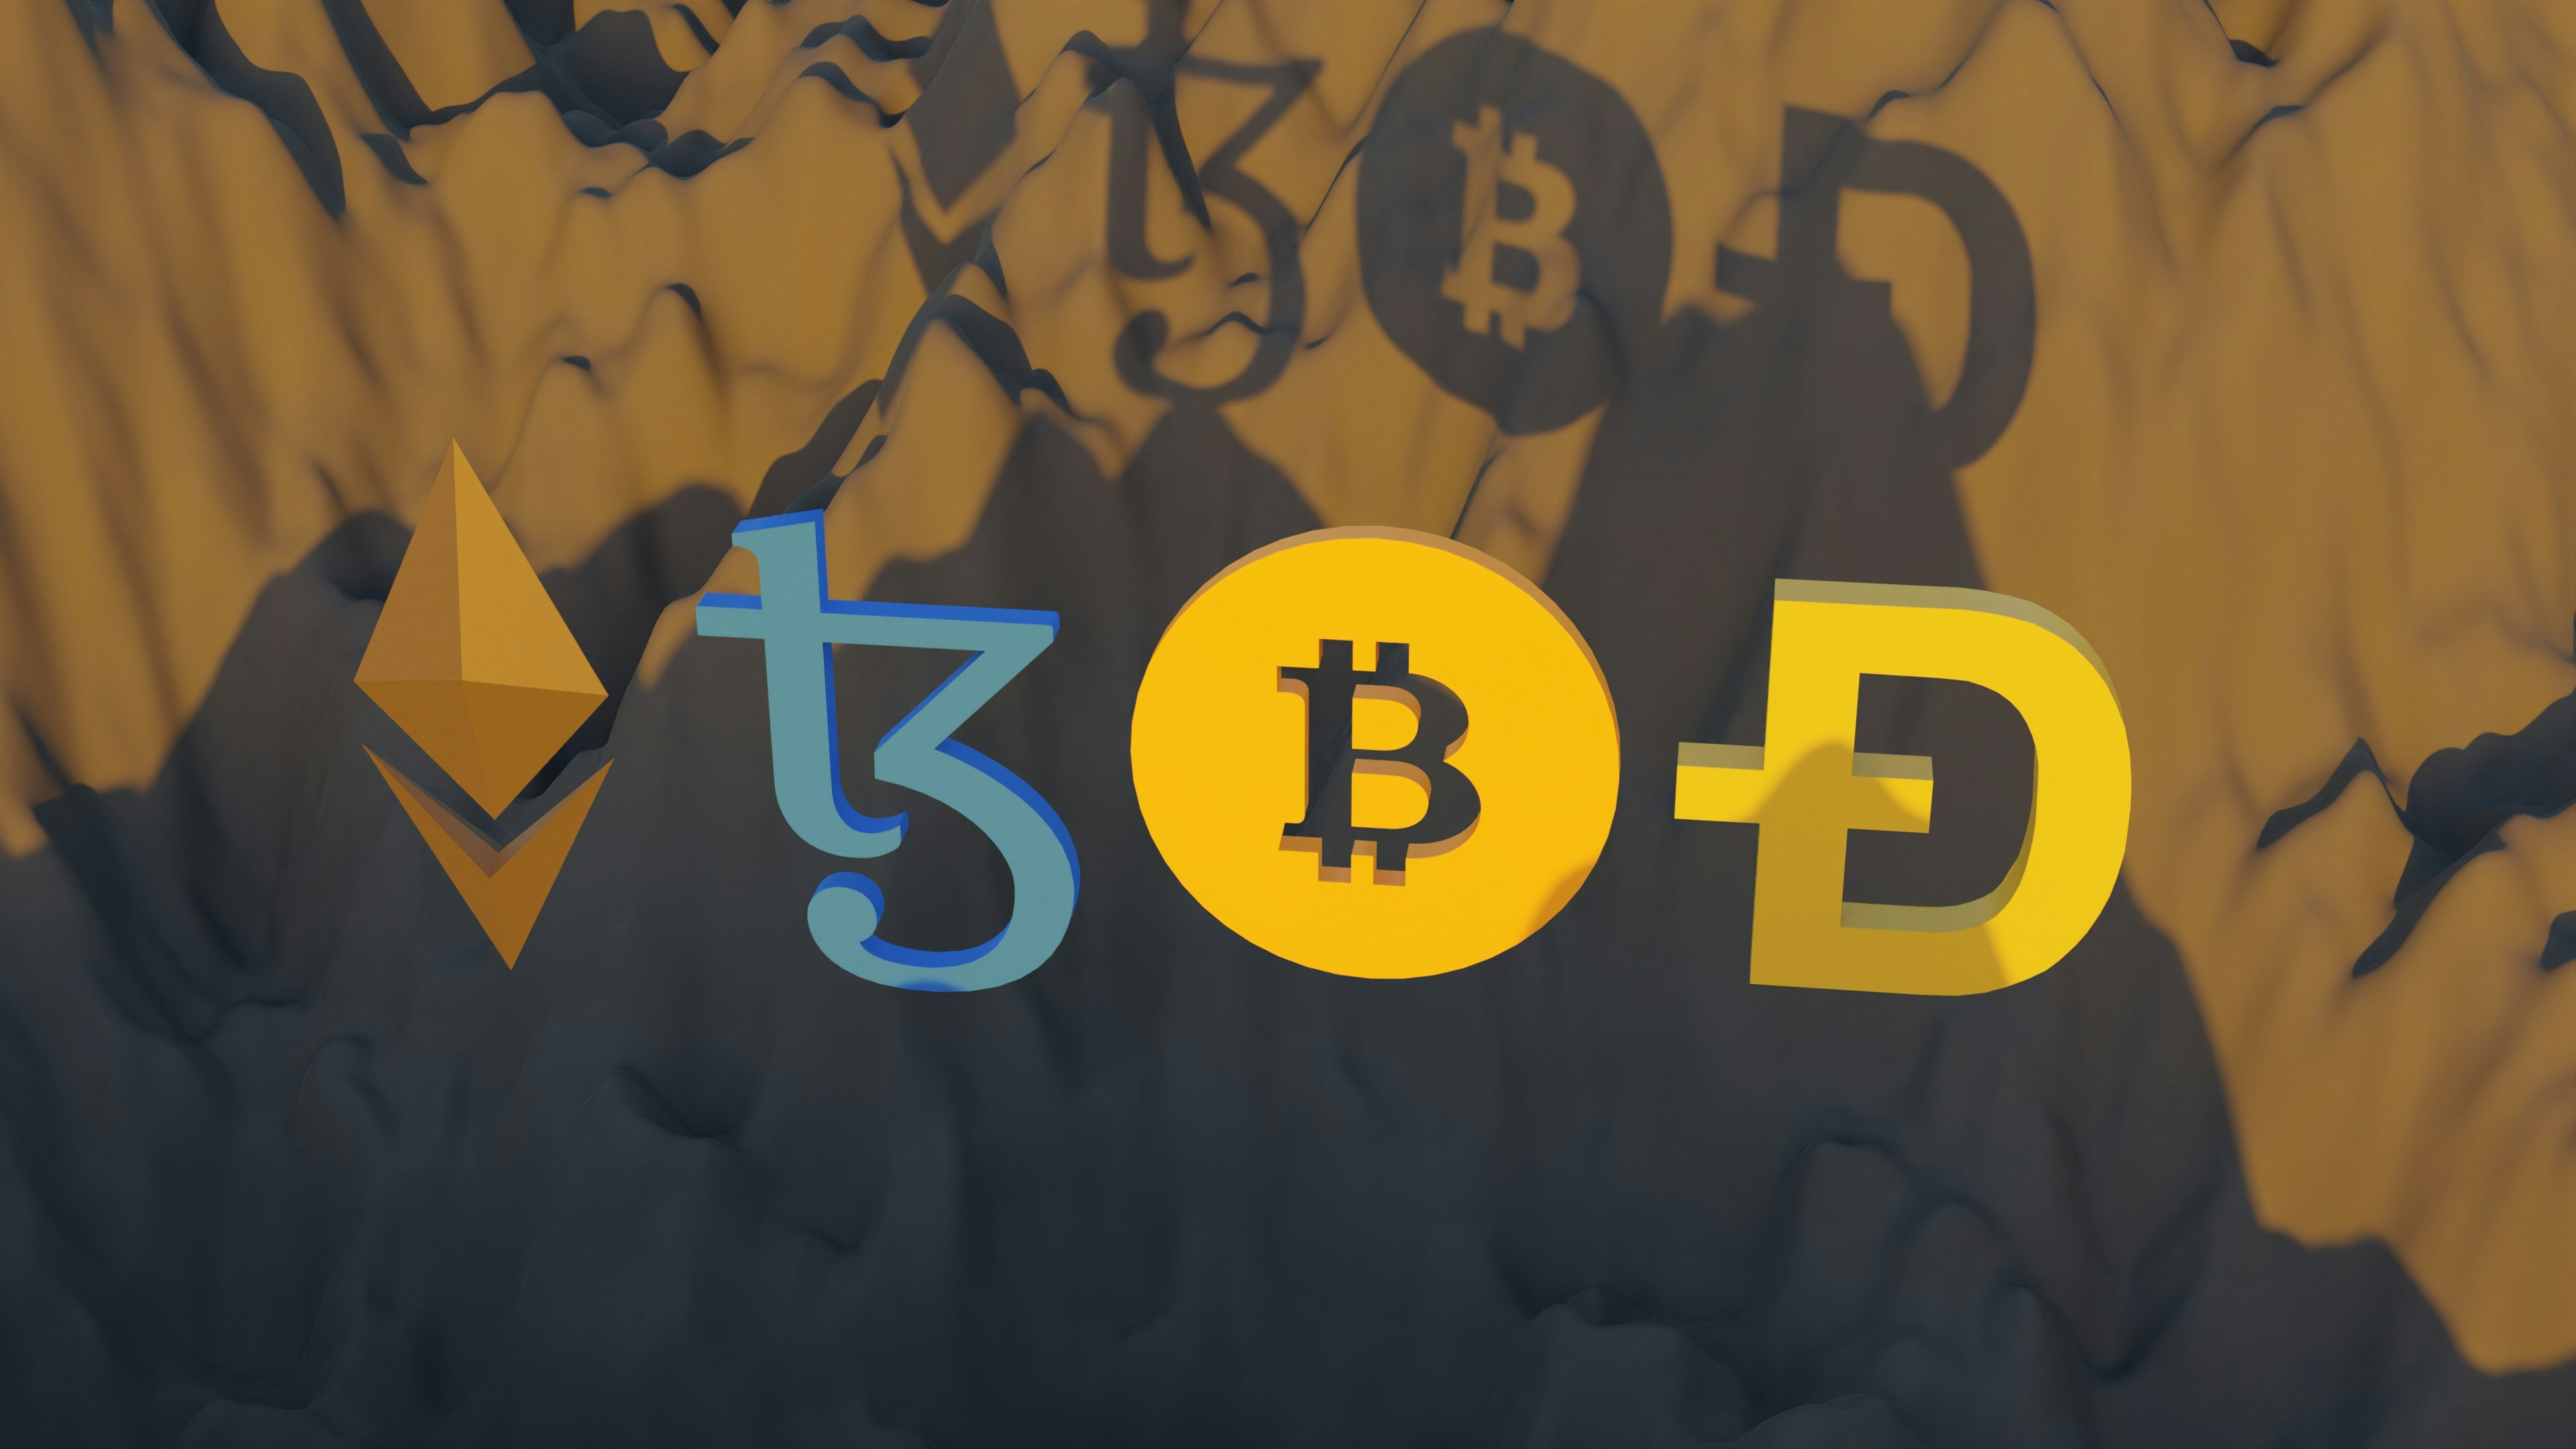 3D illustration of Tezos coin, bitcoin, Ehtereum, and dogecoin. Tezos is a blockchain designed to evolve. work 👇: Email: shubhamdhage000@gmail.com